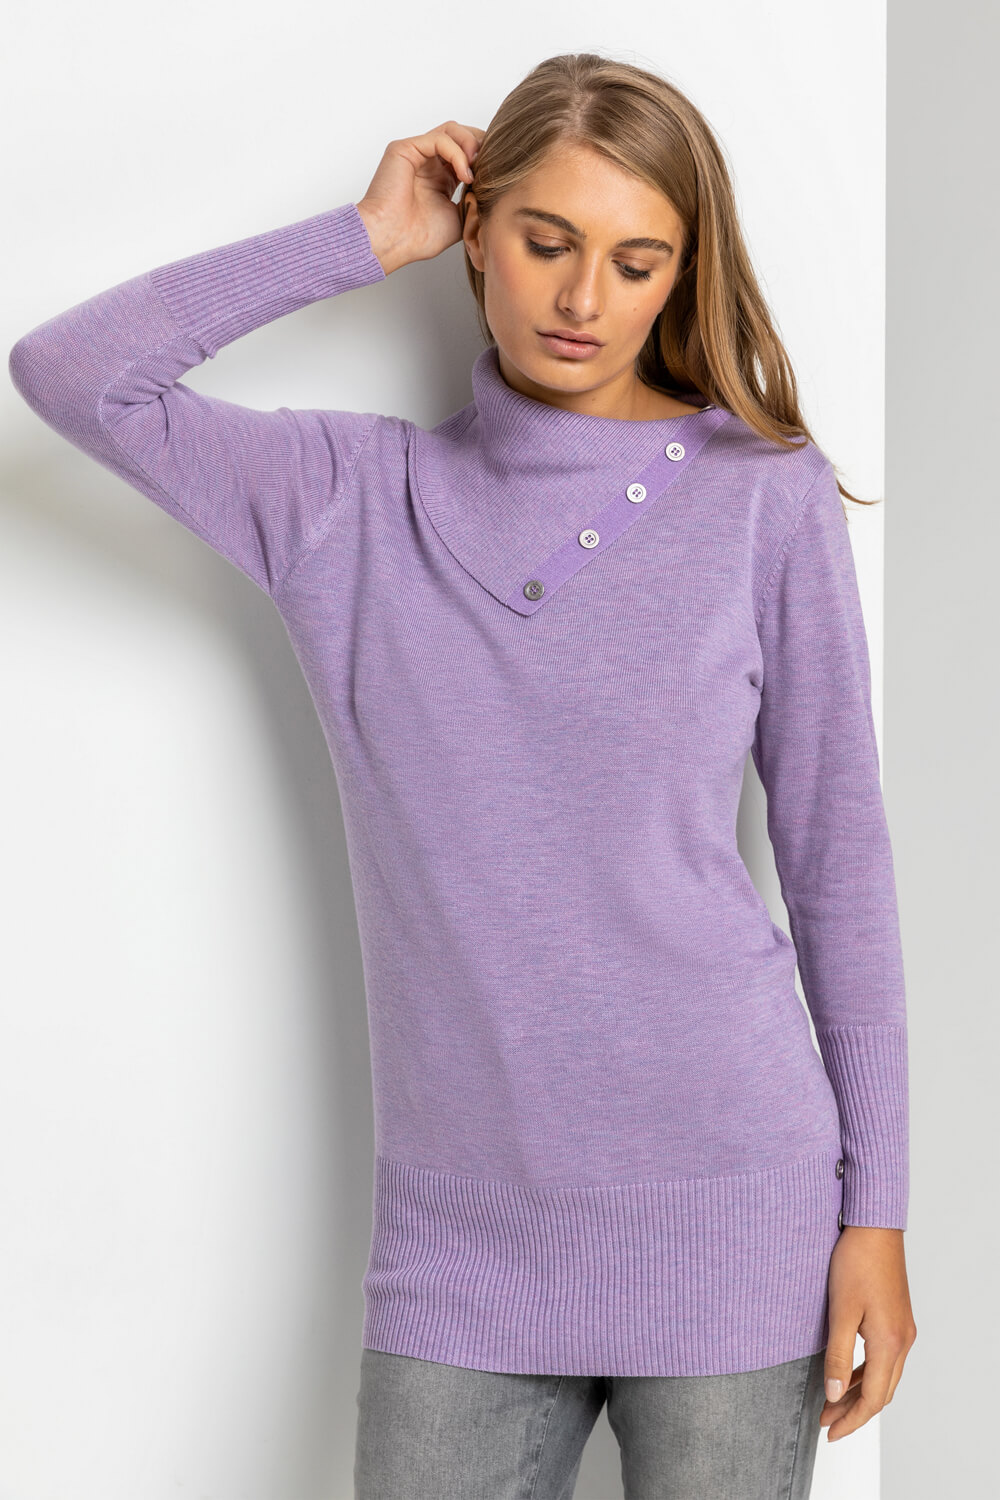 Womens Scottish chunky cowl neck jumper in Puprle marl - The Croft